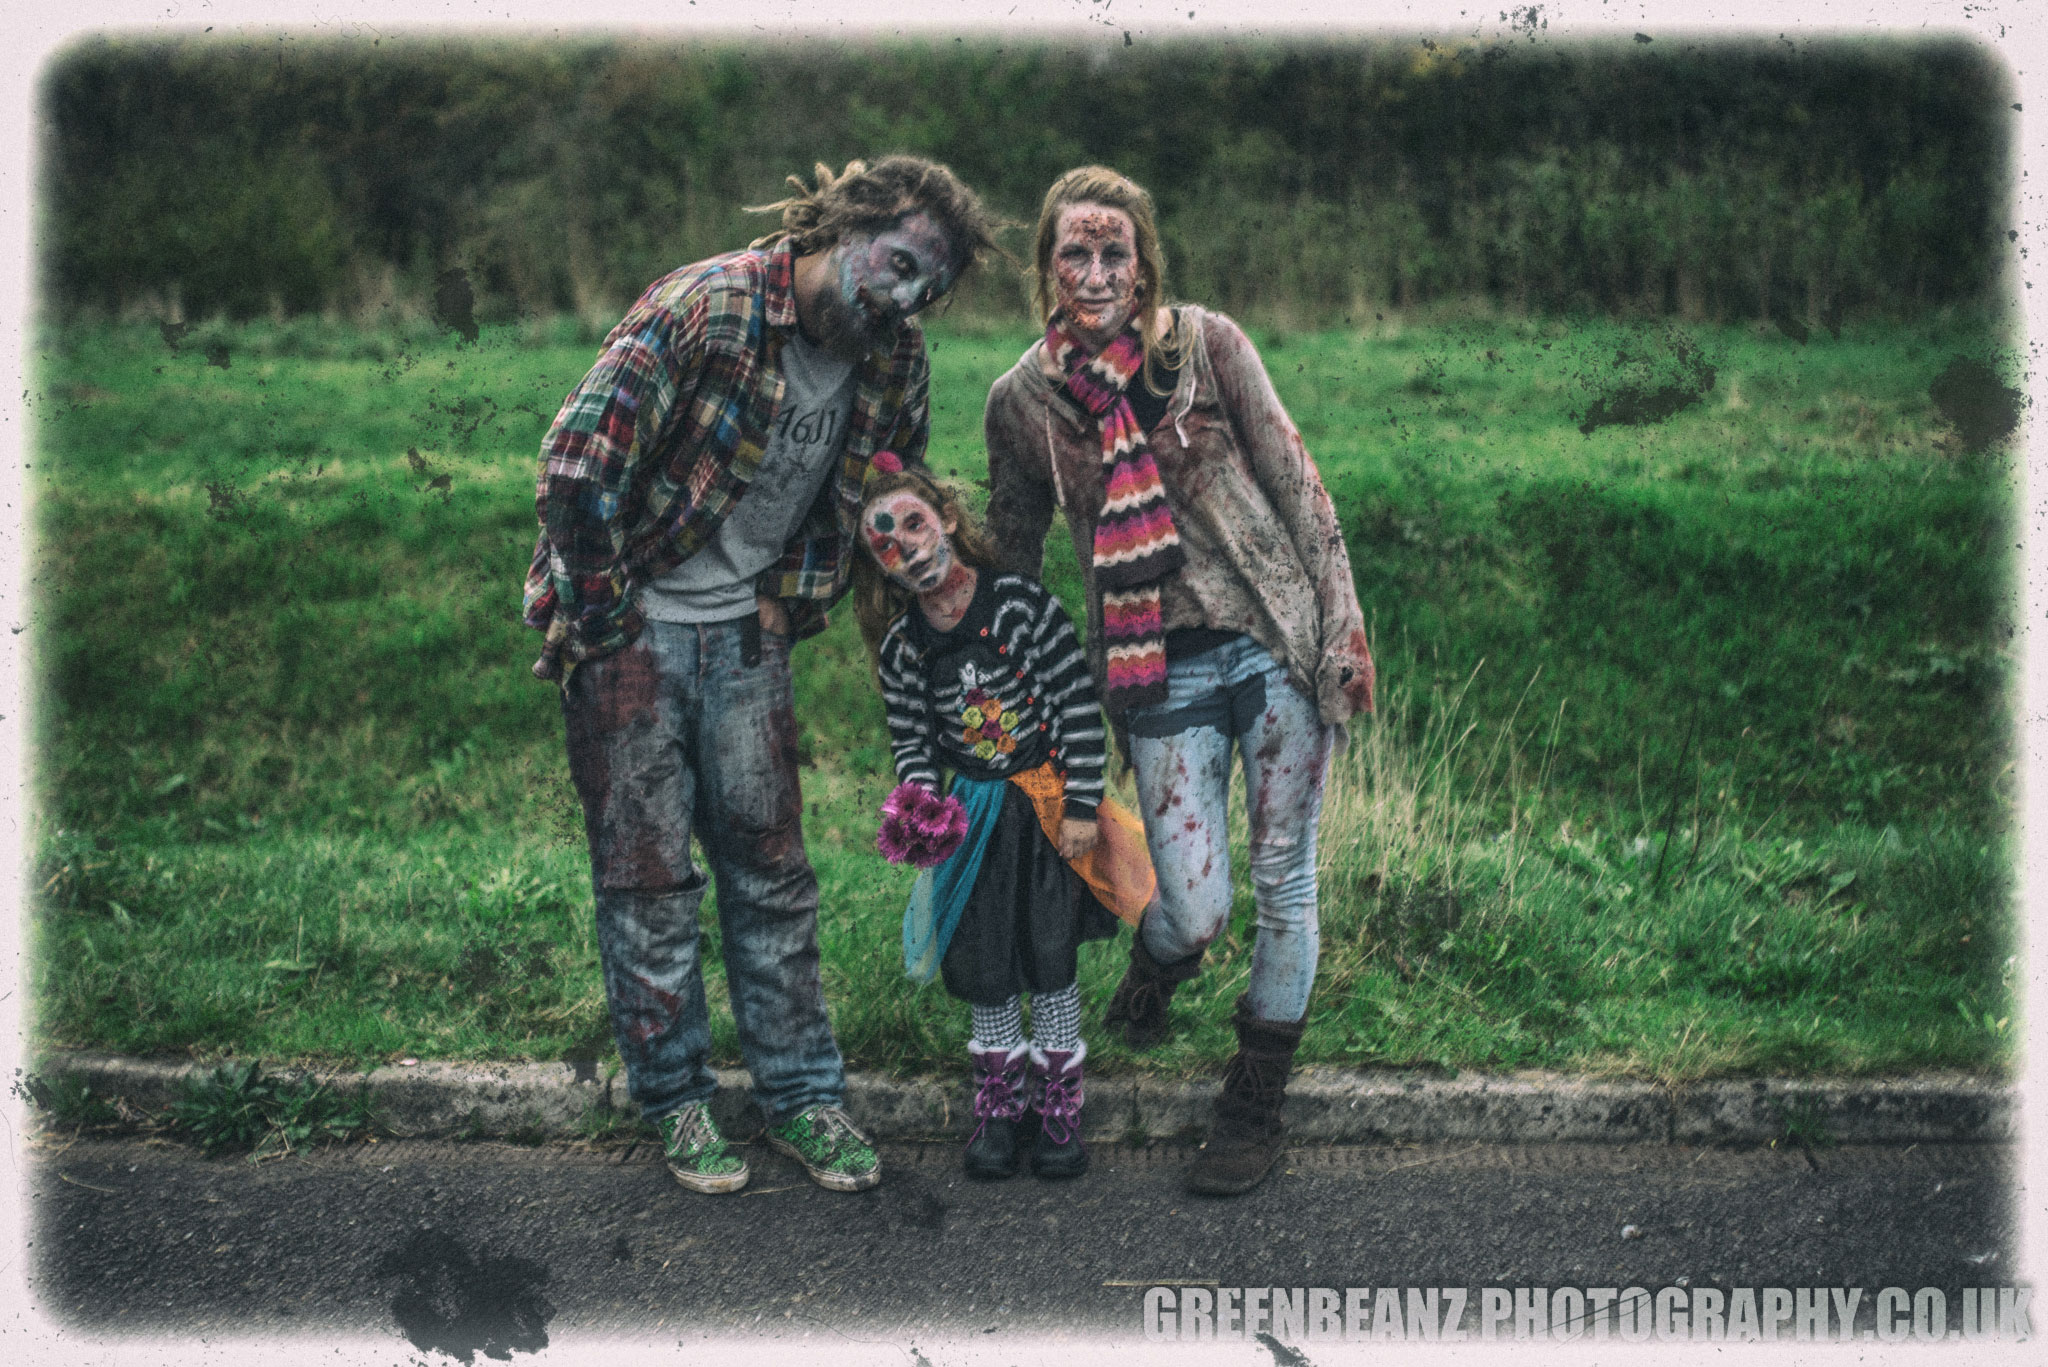 Discarded Undead Family Snap found near the start of Ivybridge Zombie Walk